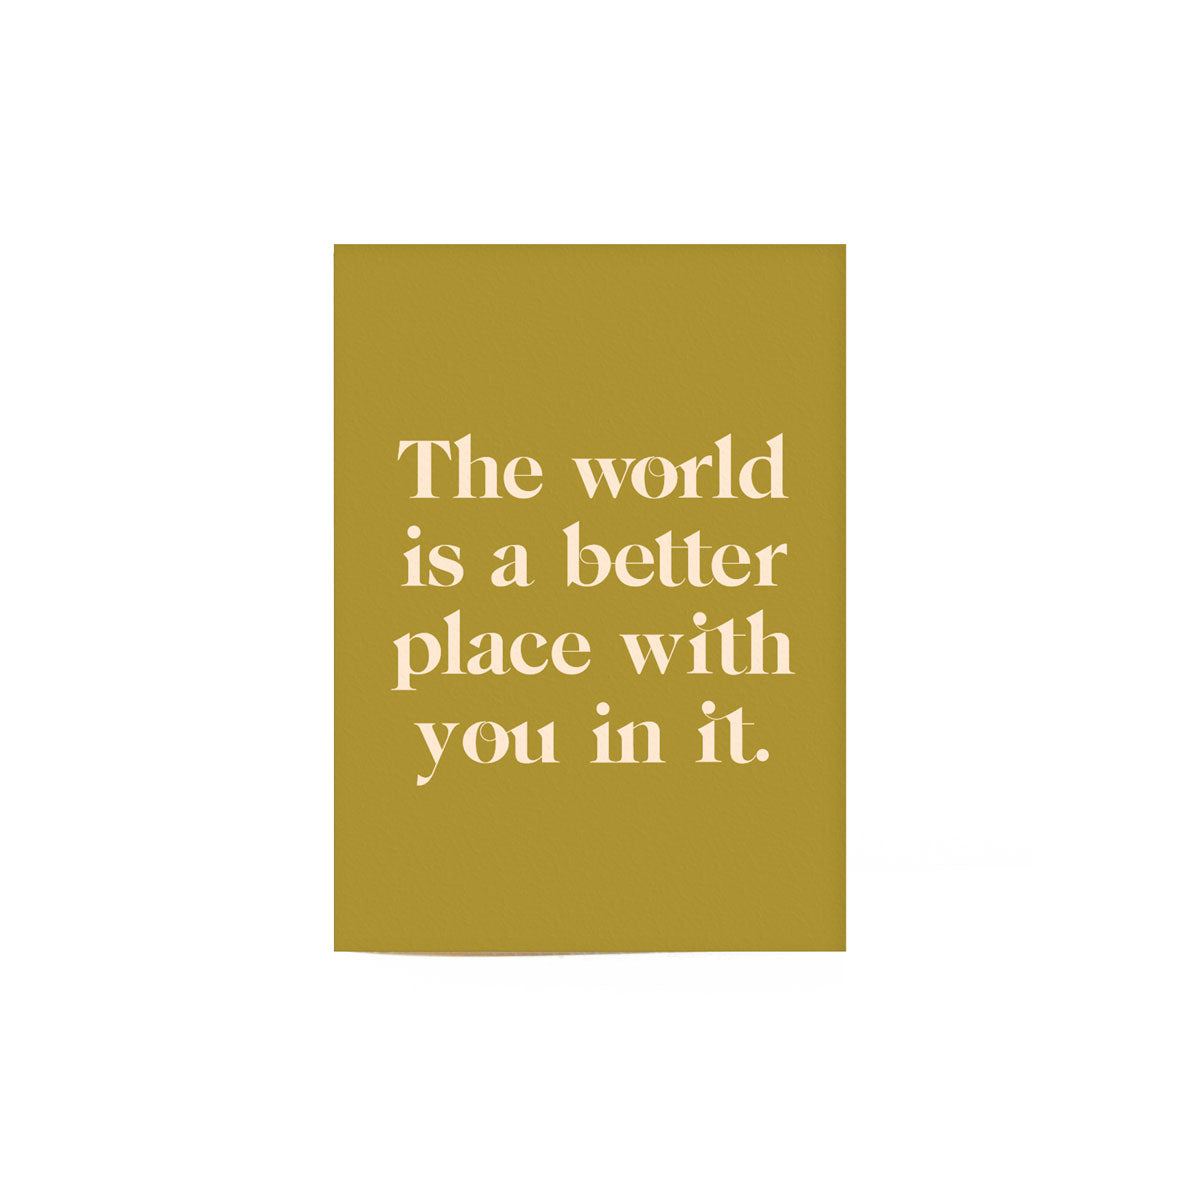 dijon colored "World is a better place" card that reads "The world is a better place with you in it" in white text